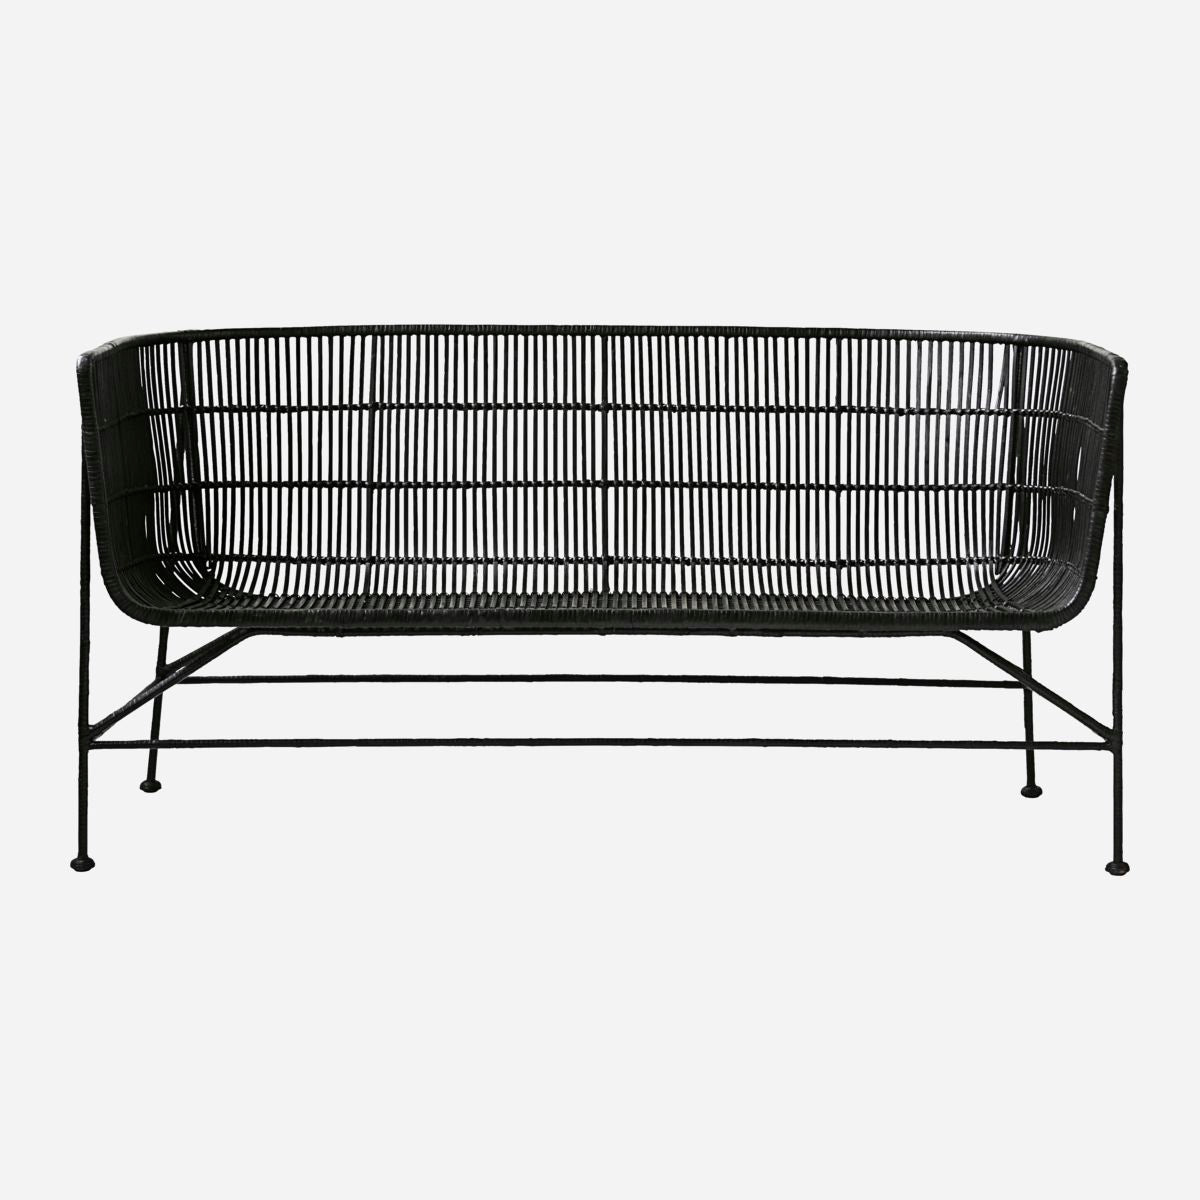 Cuun Two-Seater Woven Rattan sofa in Black or Natural | by House Doctor - Lifestory